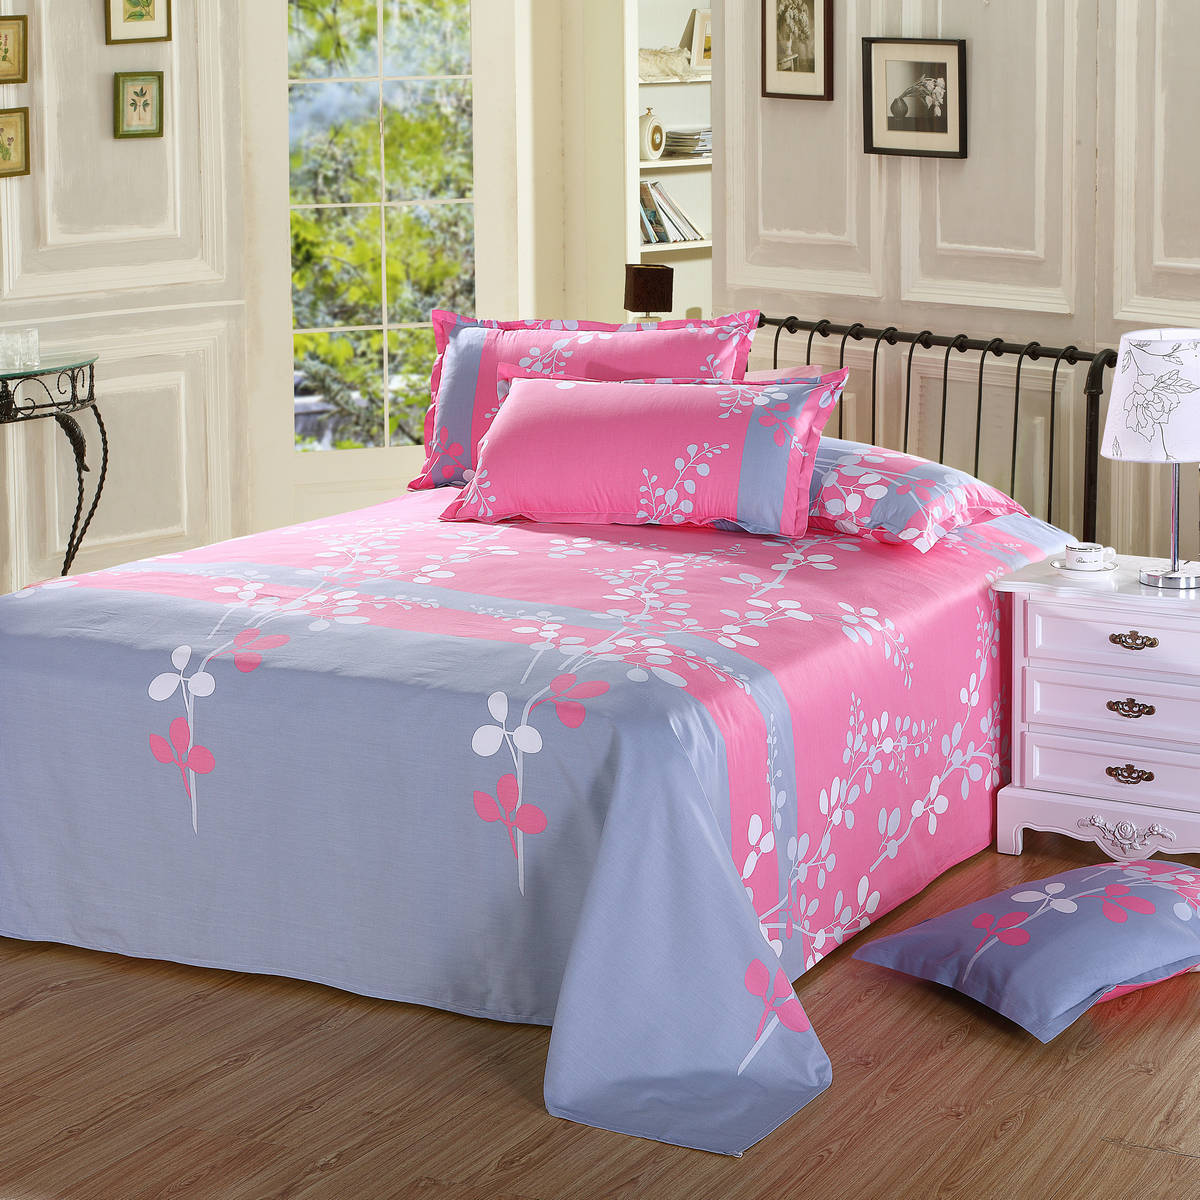 100% cotton pinting bed sheets for home